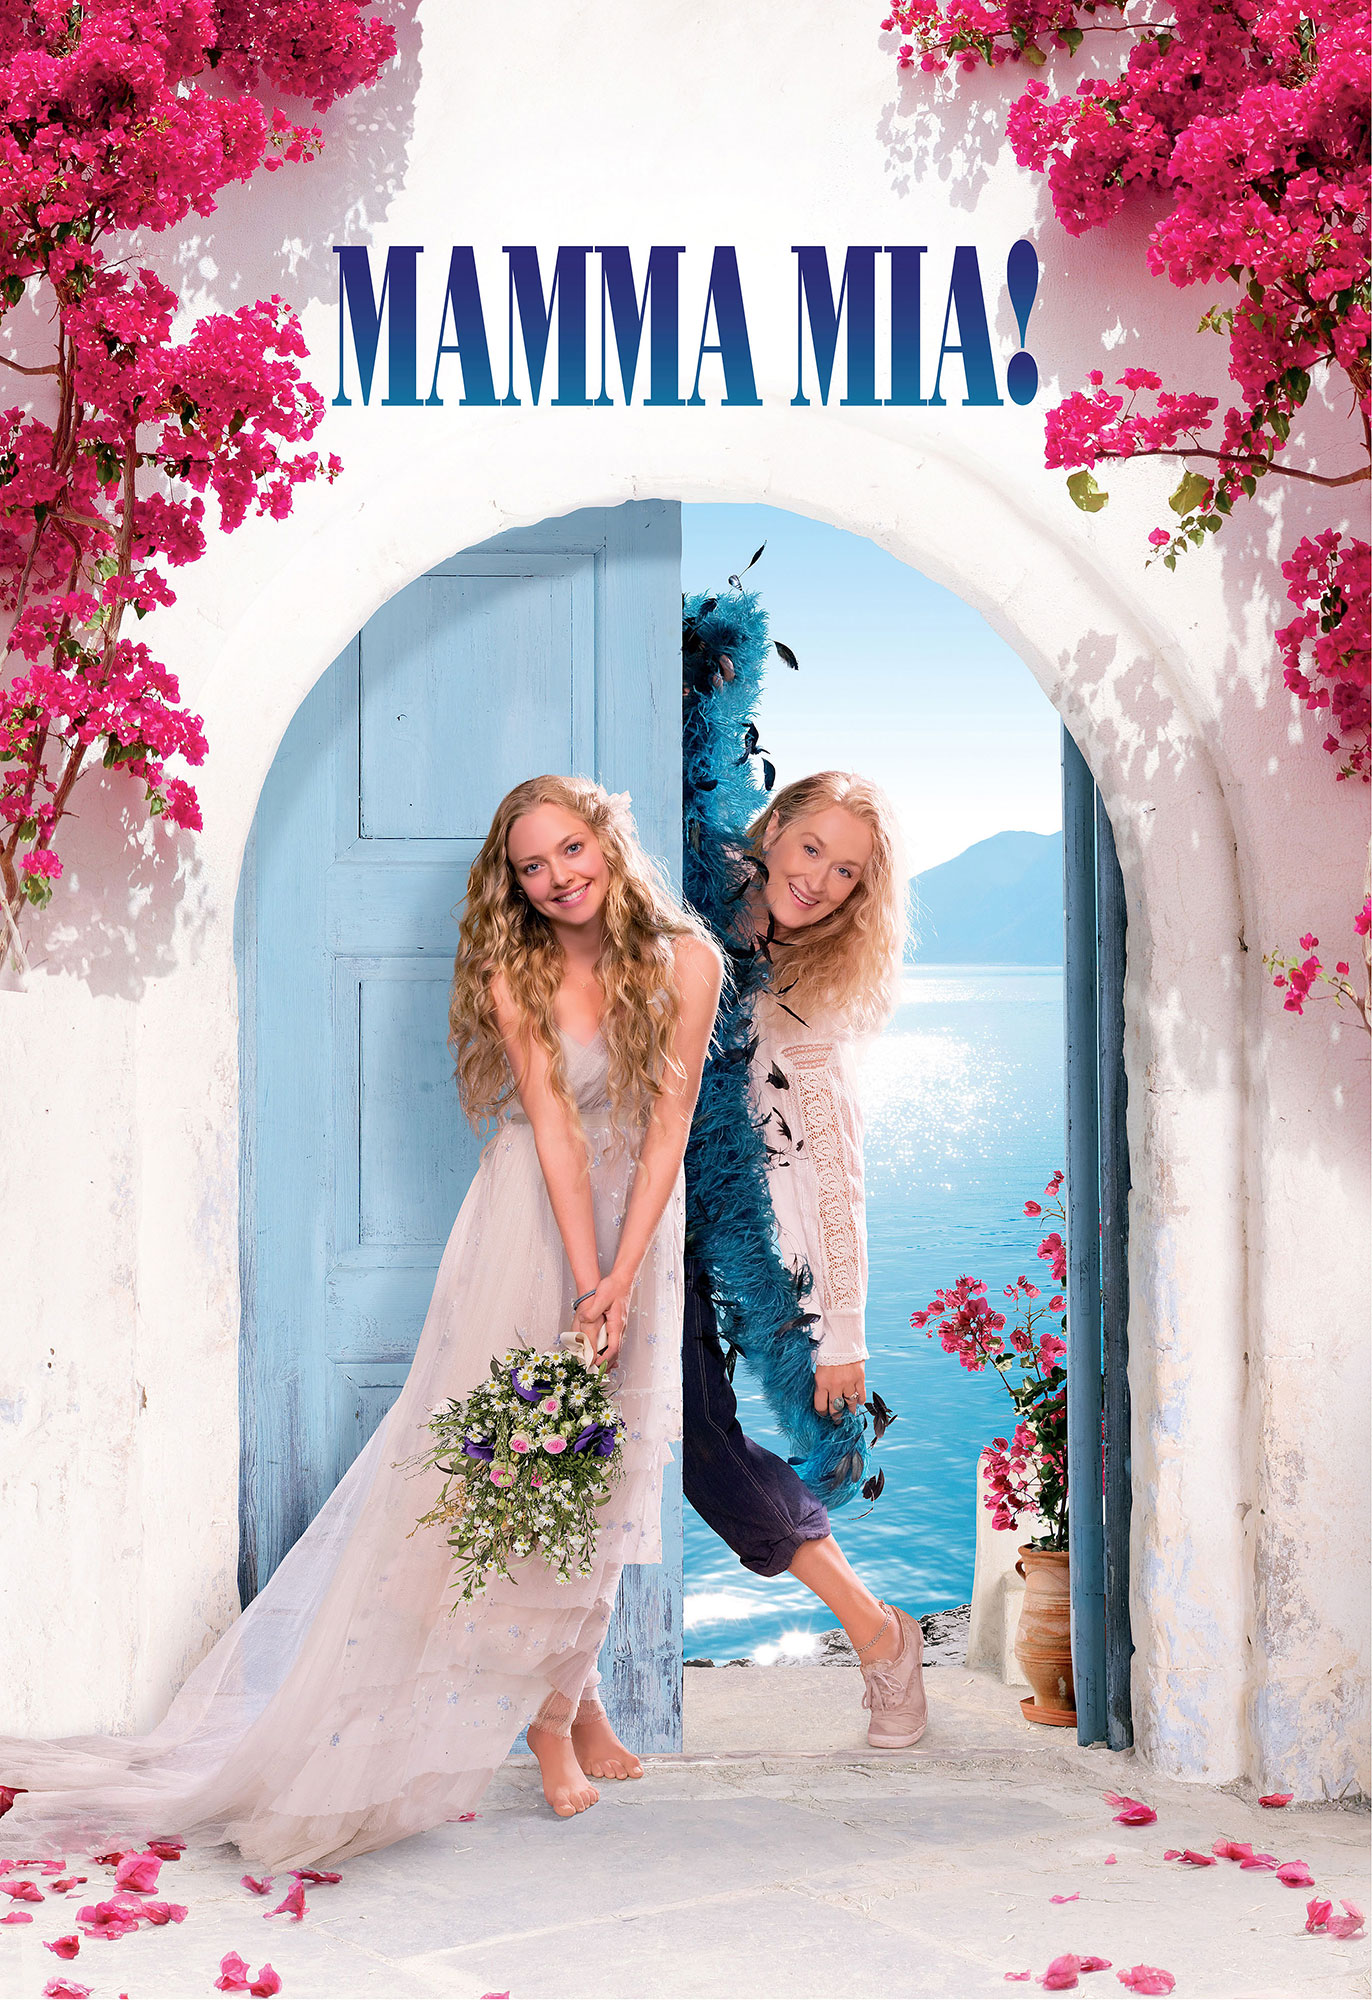 Mamma-Mia-Cast-Where-Are-They-Now-Feature.jpg?quality=40&strip=all